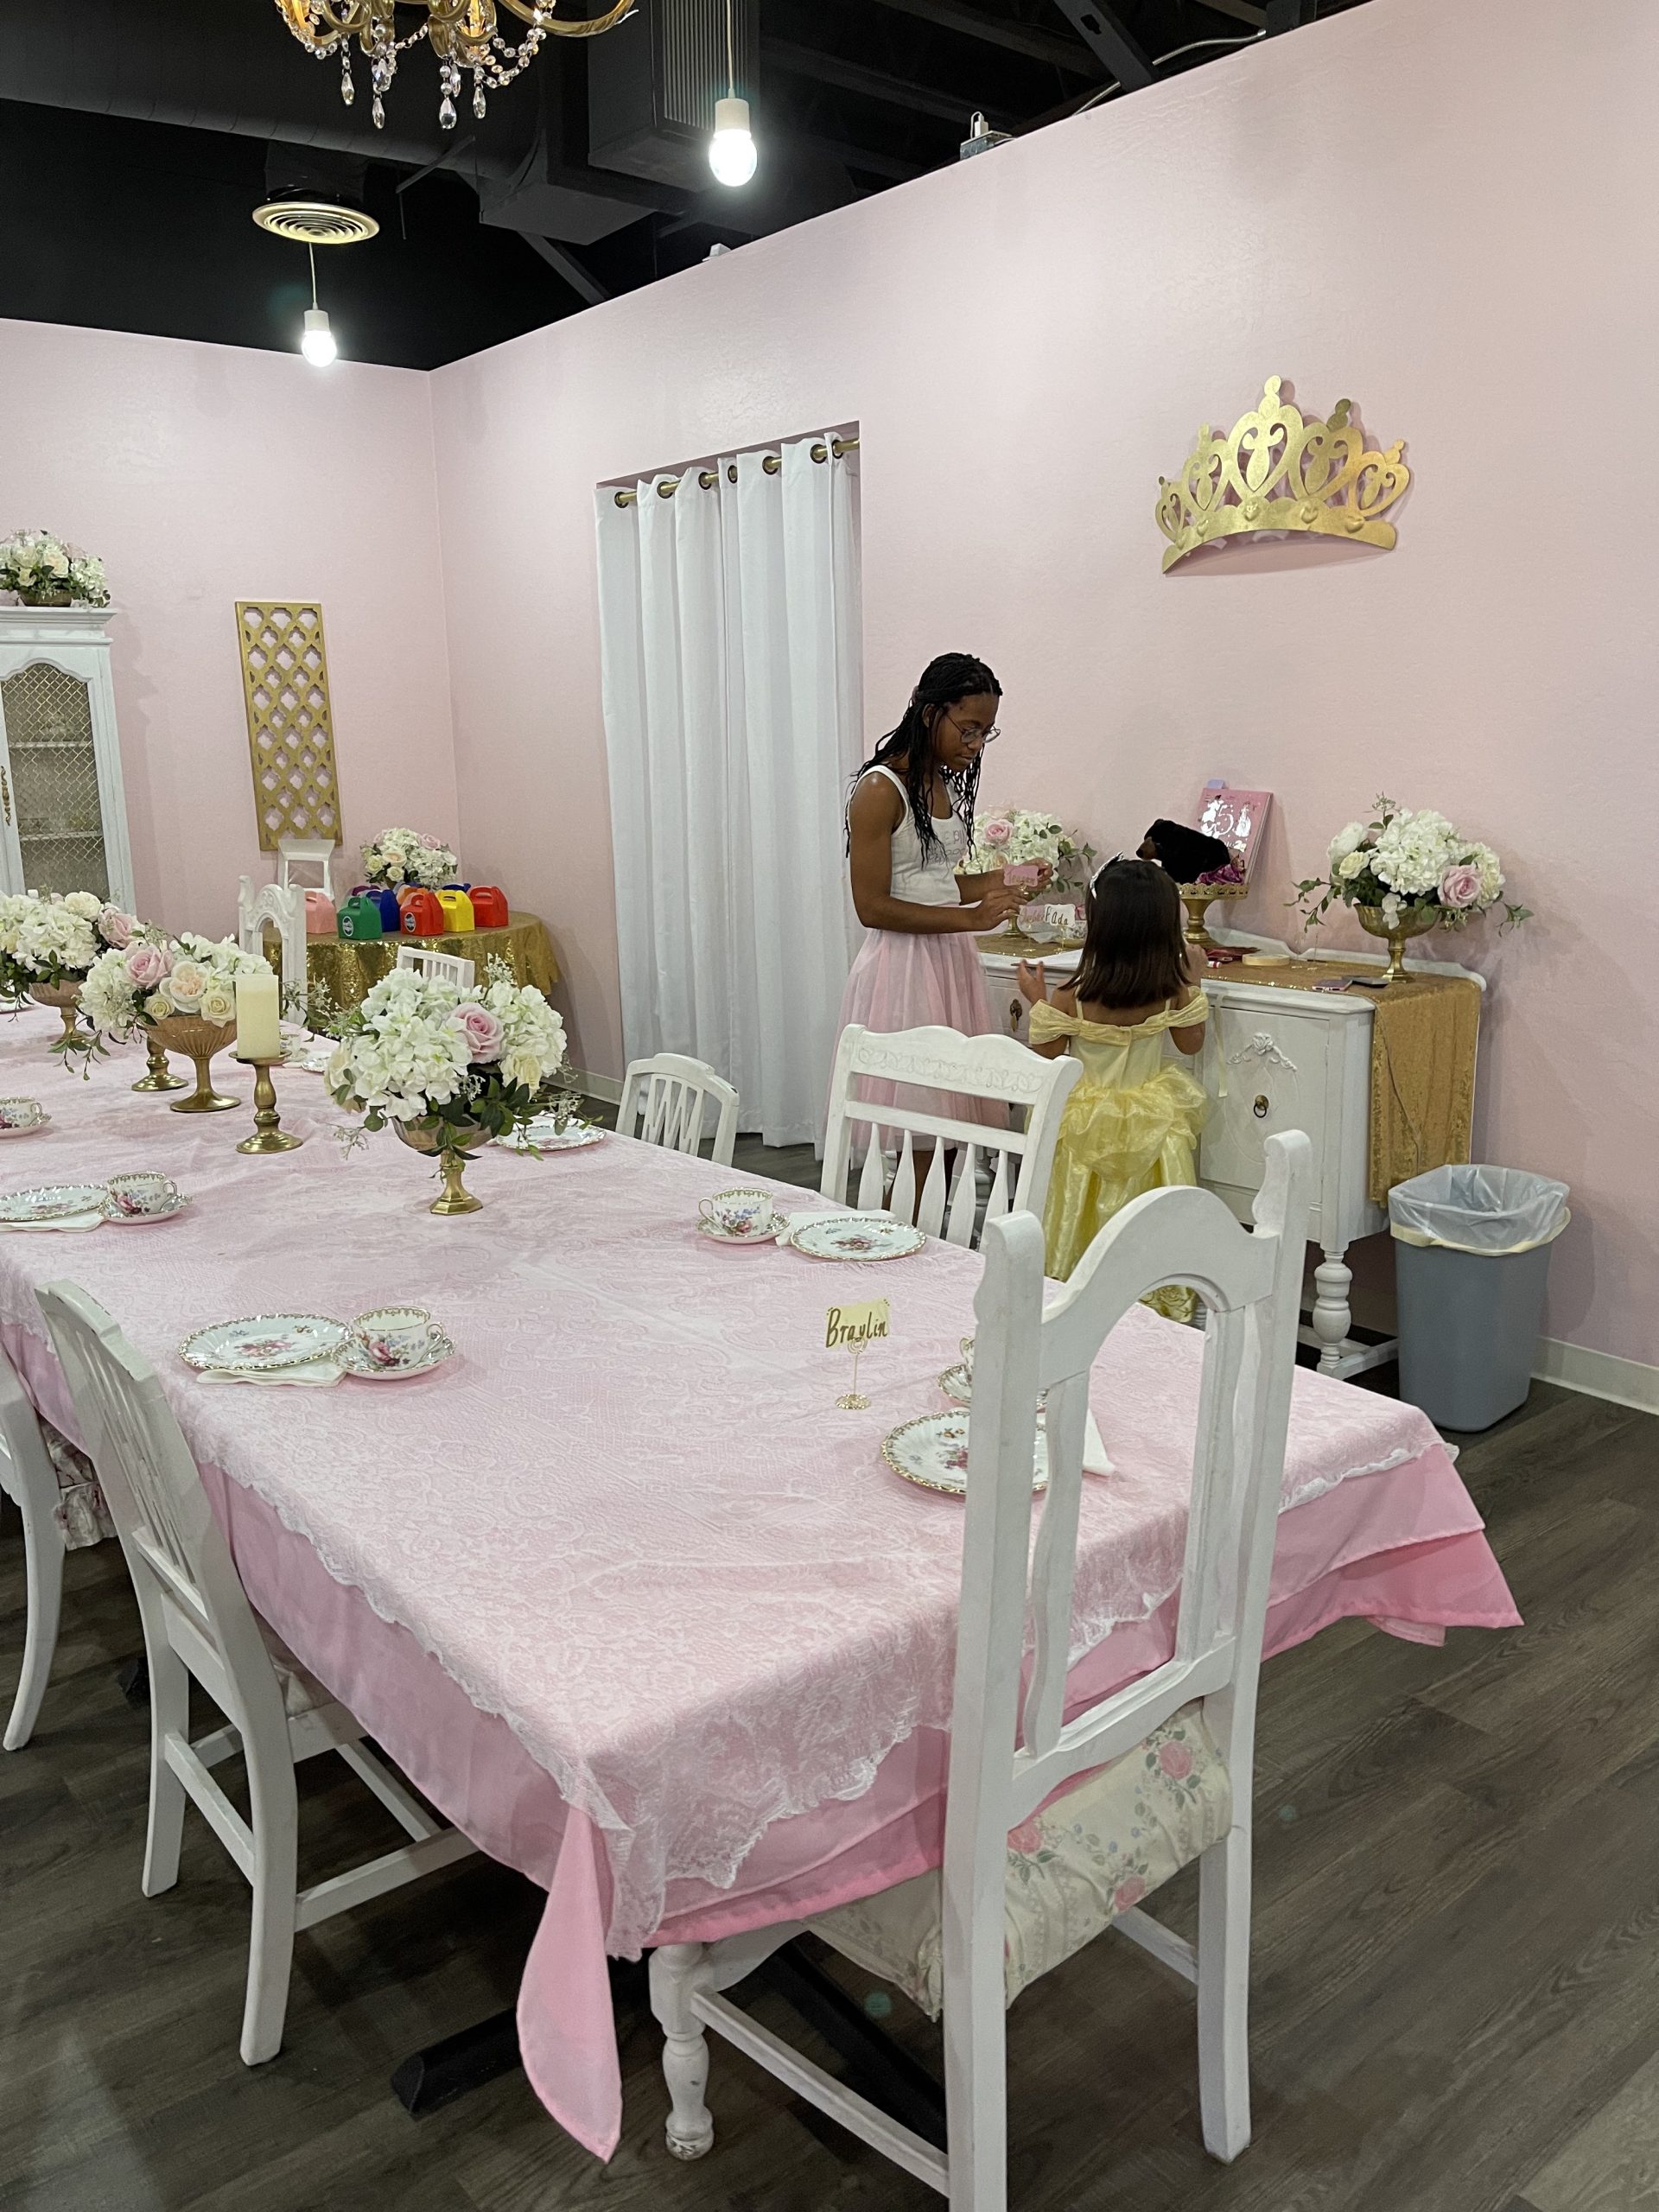 Large table set for a tea party with a little girl dressed as Belle standing next to a princess helper at a birthday party.